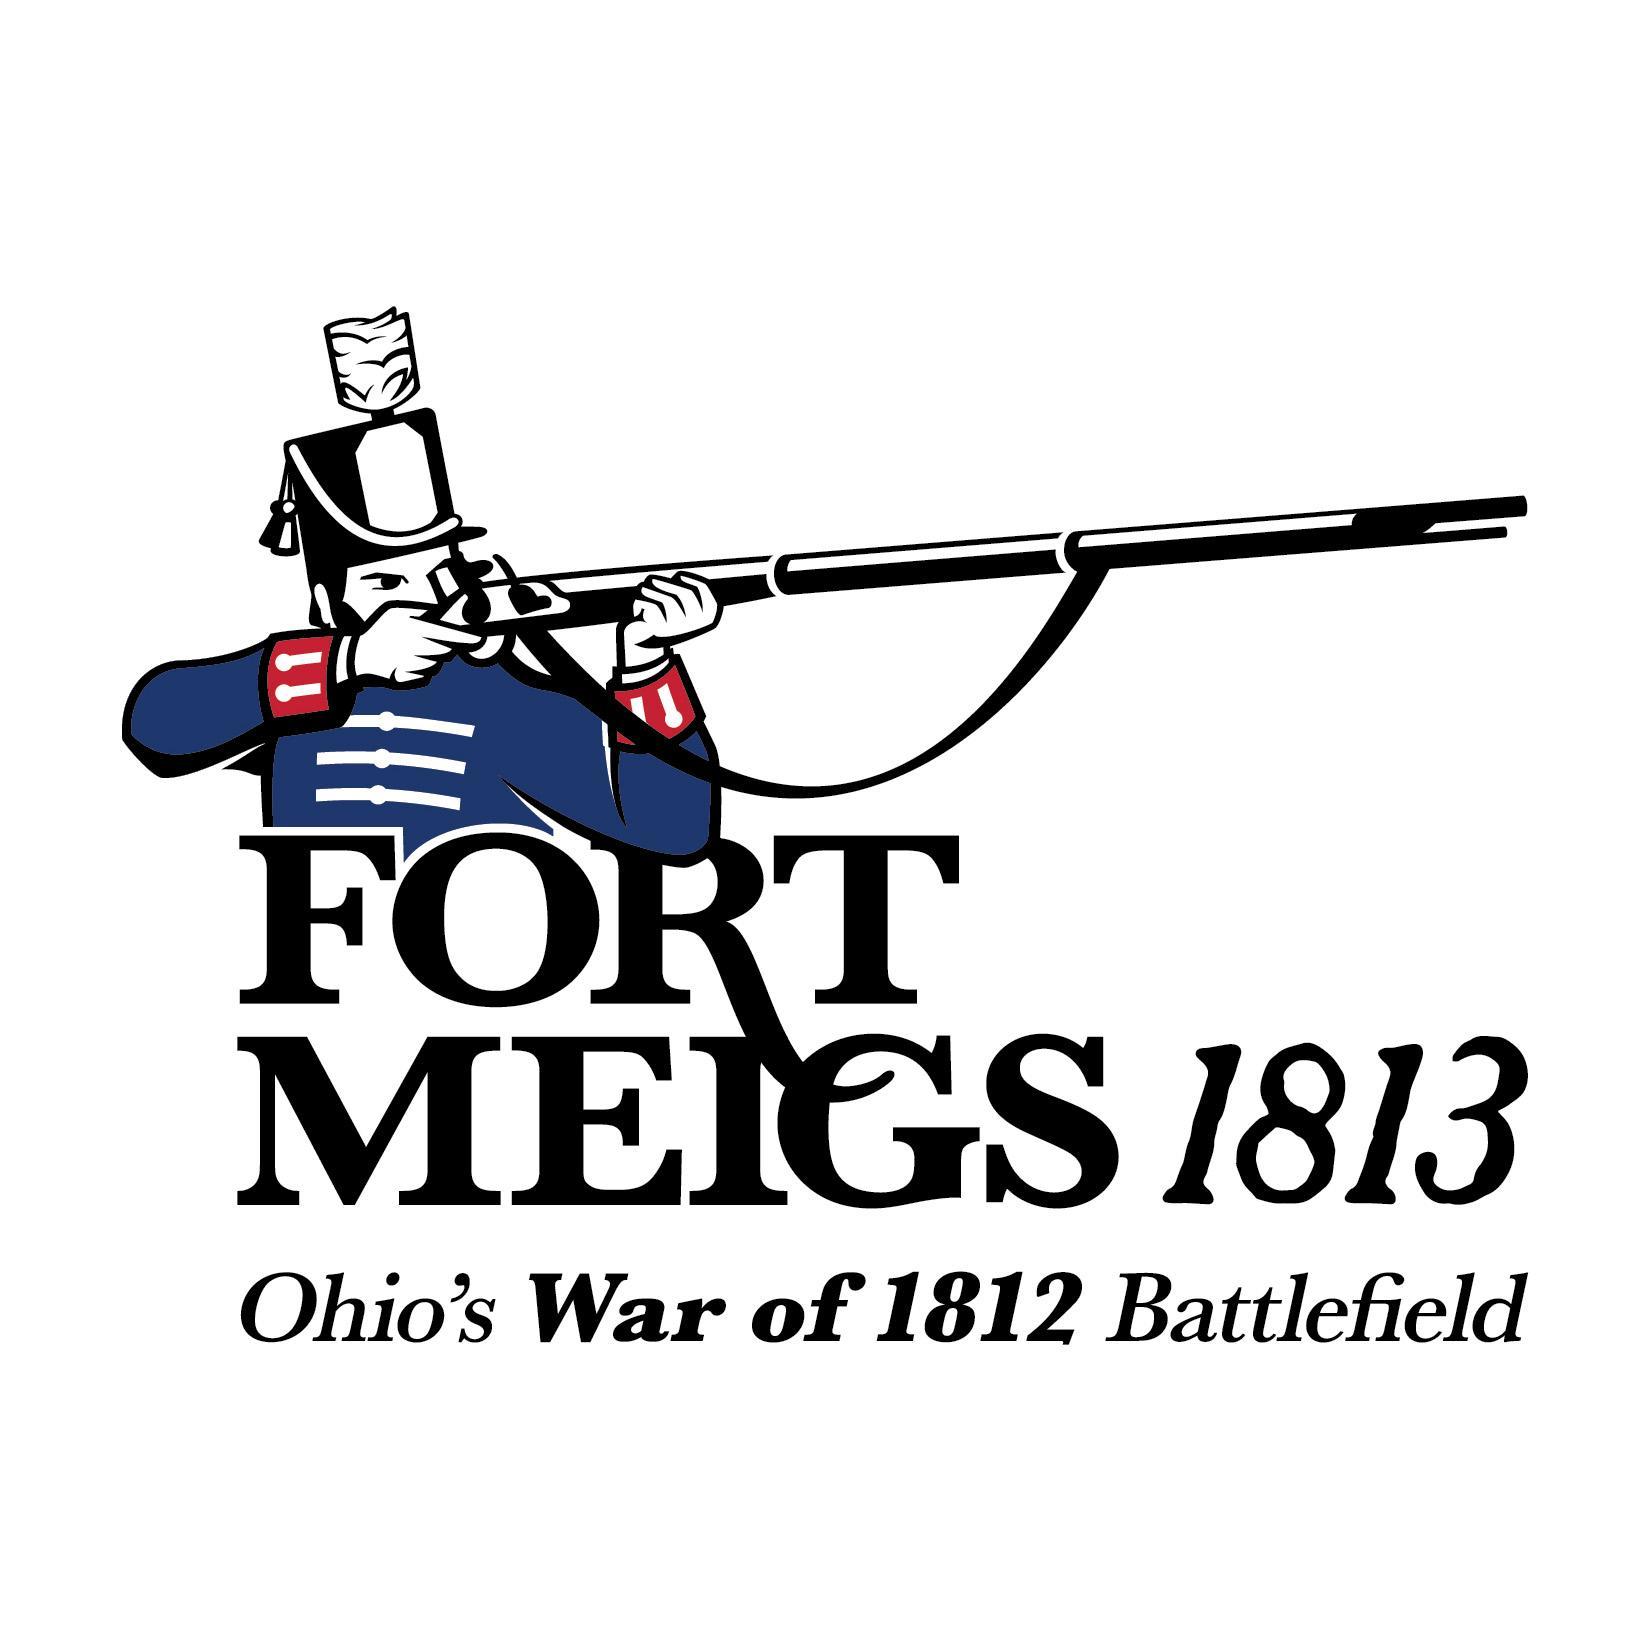 Fort Meigs is the largest reconstructed, wooden-walled fort in the U.S. Built during the War of 1812, it stopped British invasion of the Old Northwest.